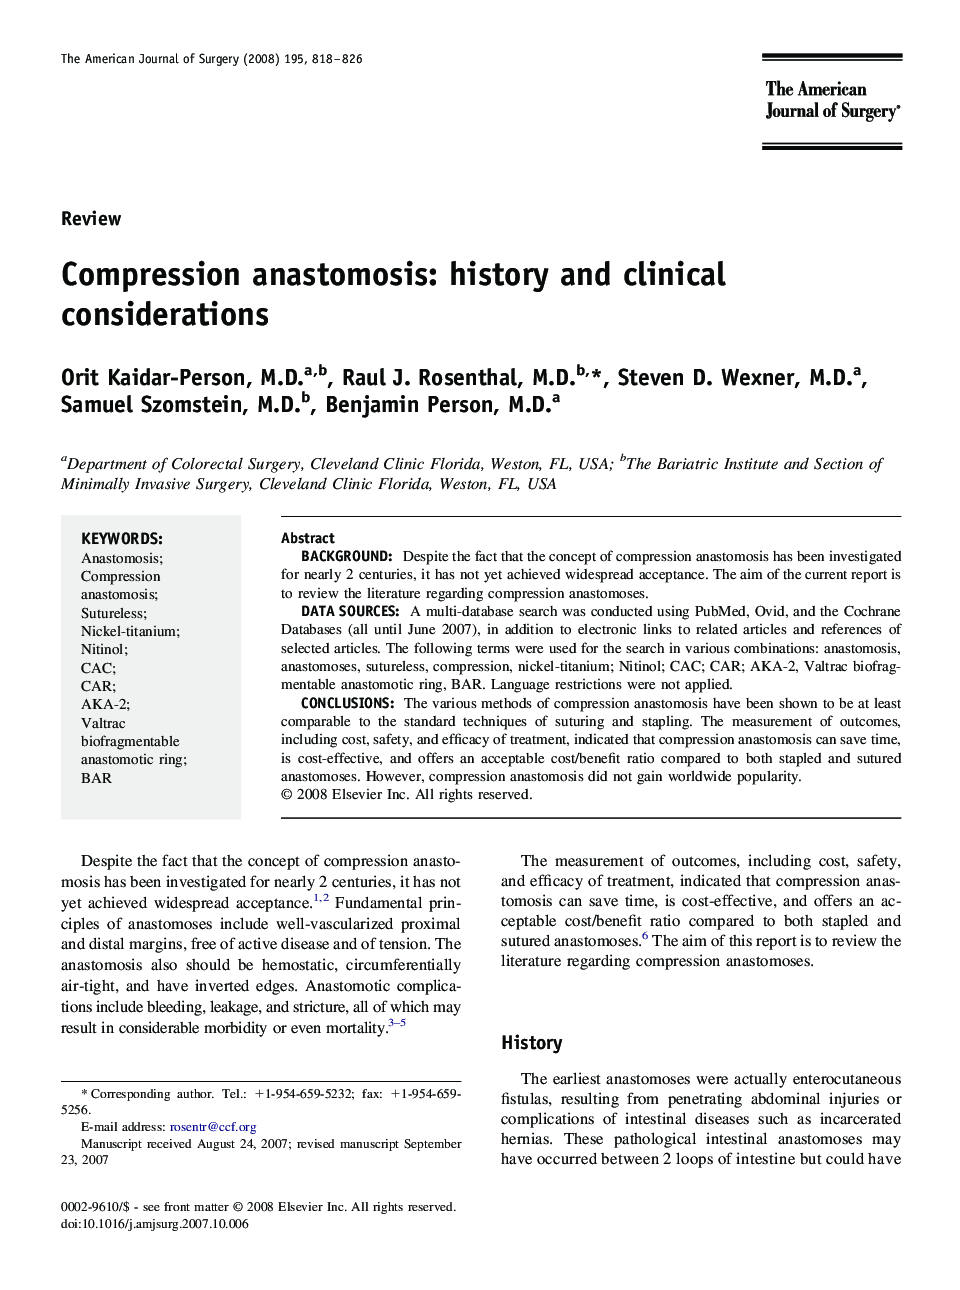 Compression anastomosis: history and clinical considerations